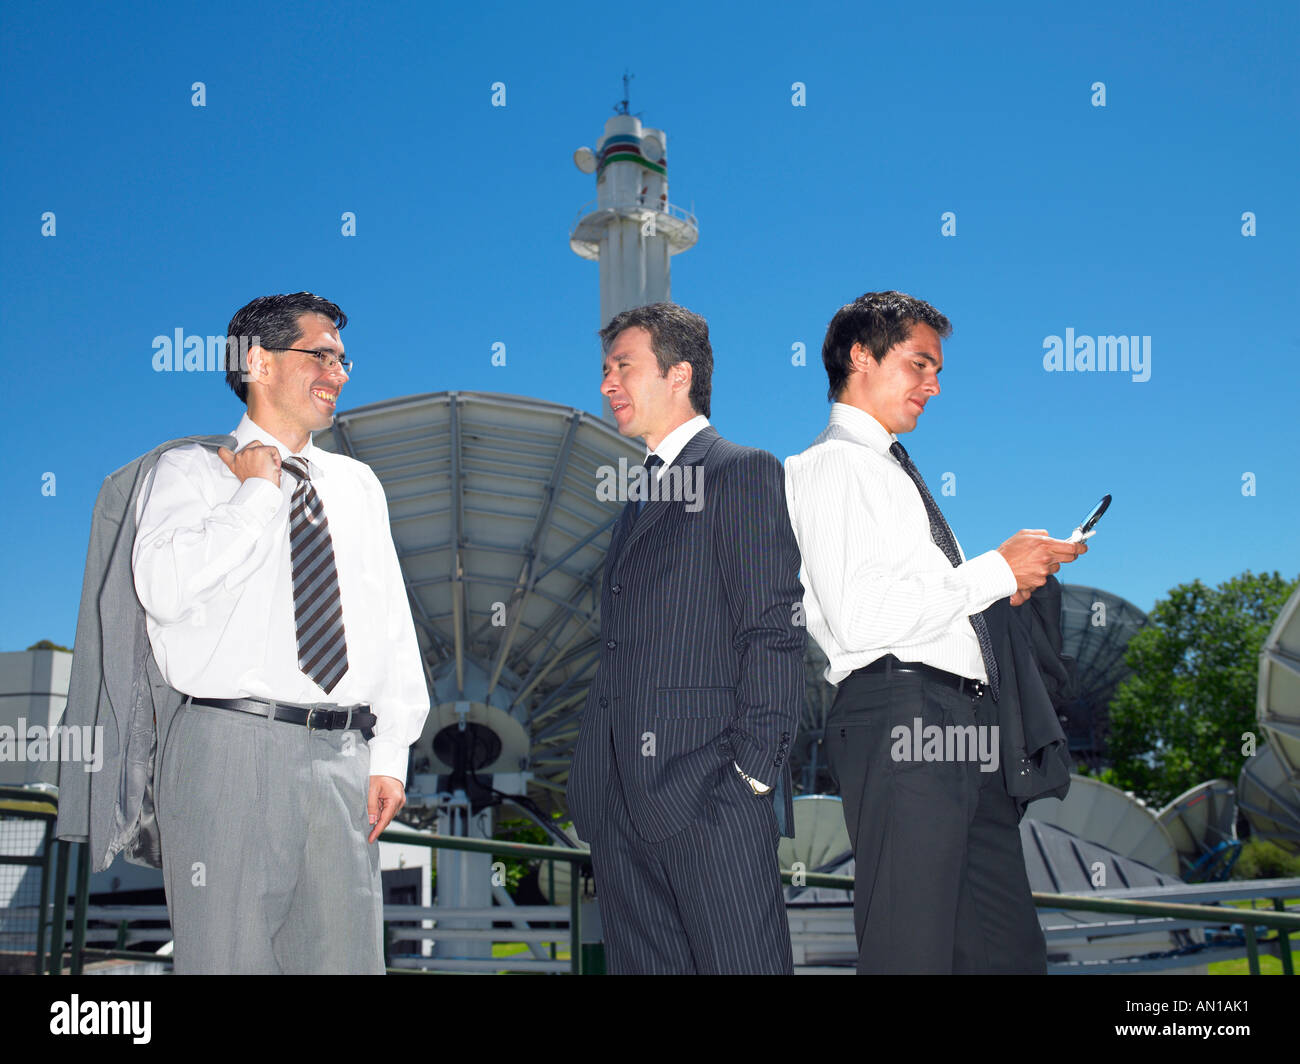 Three businessmen standing on a roof Stock Photo